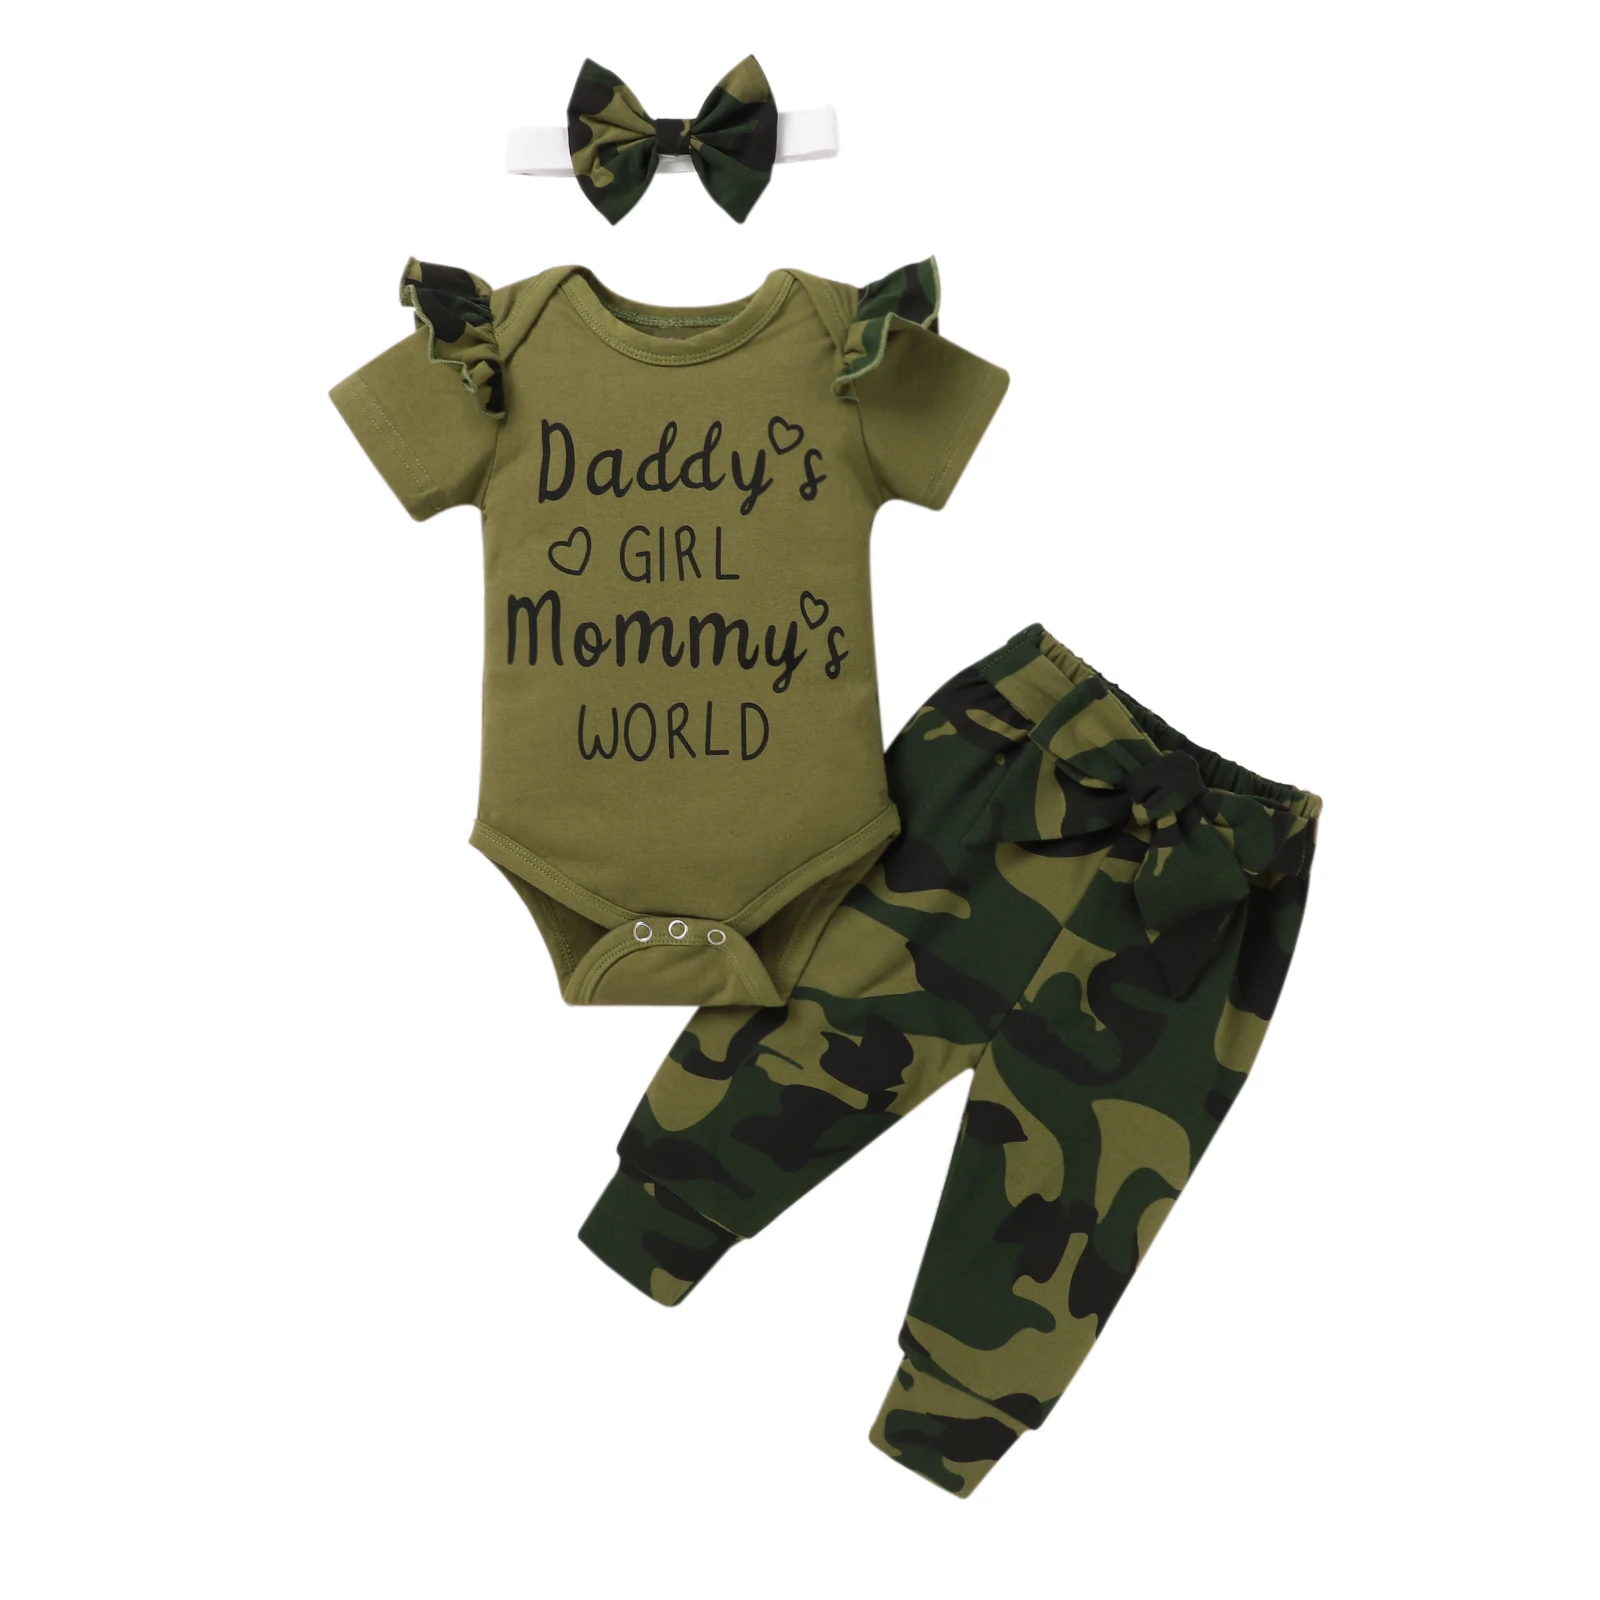 baby clothes penguin set 3 Pieces Kids Suit Set, Letter Print O-Neck Short Sleeve Romper+ Camouflage Print Pants+ Headband for Girls, 3-12 Months baby clothes set gift